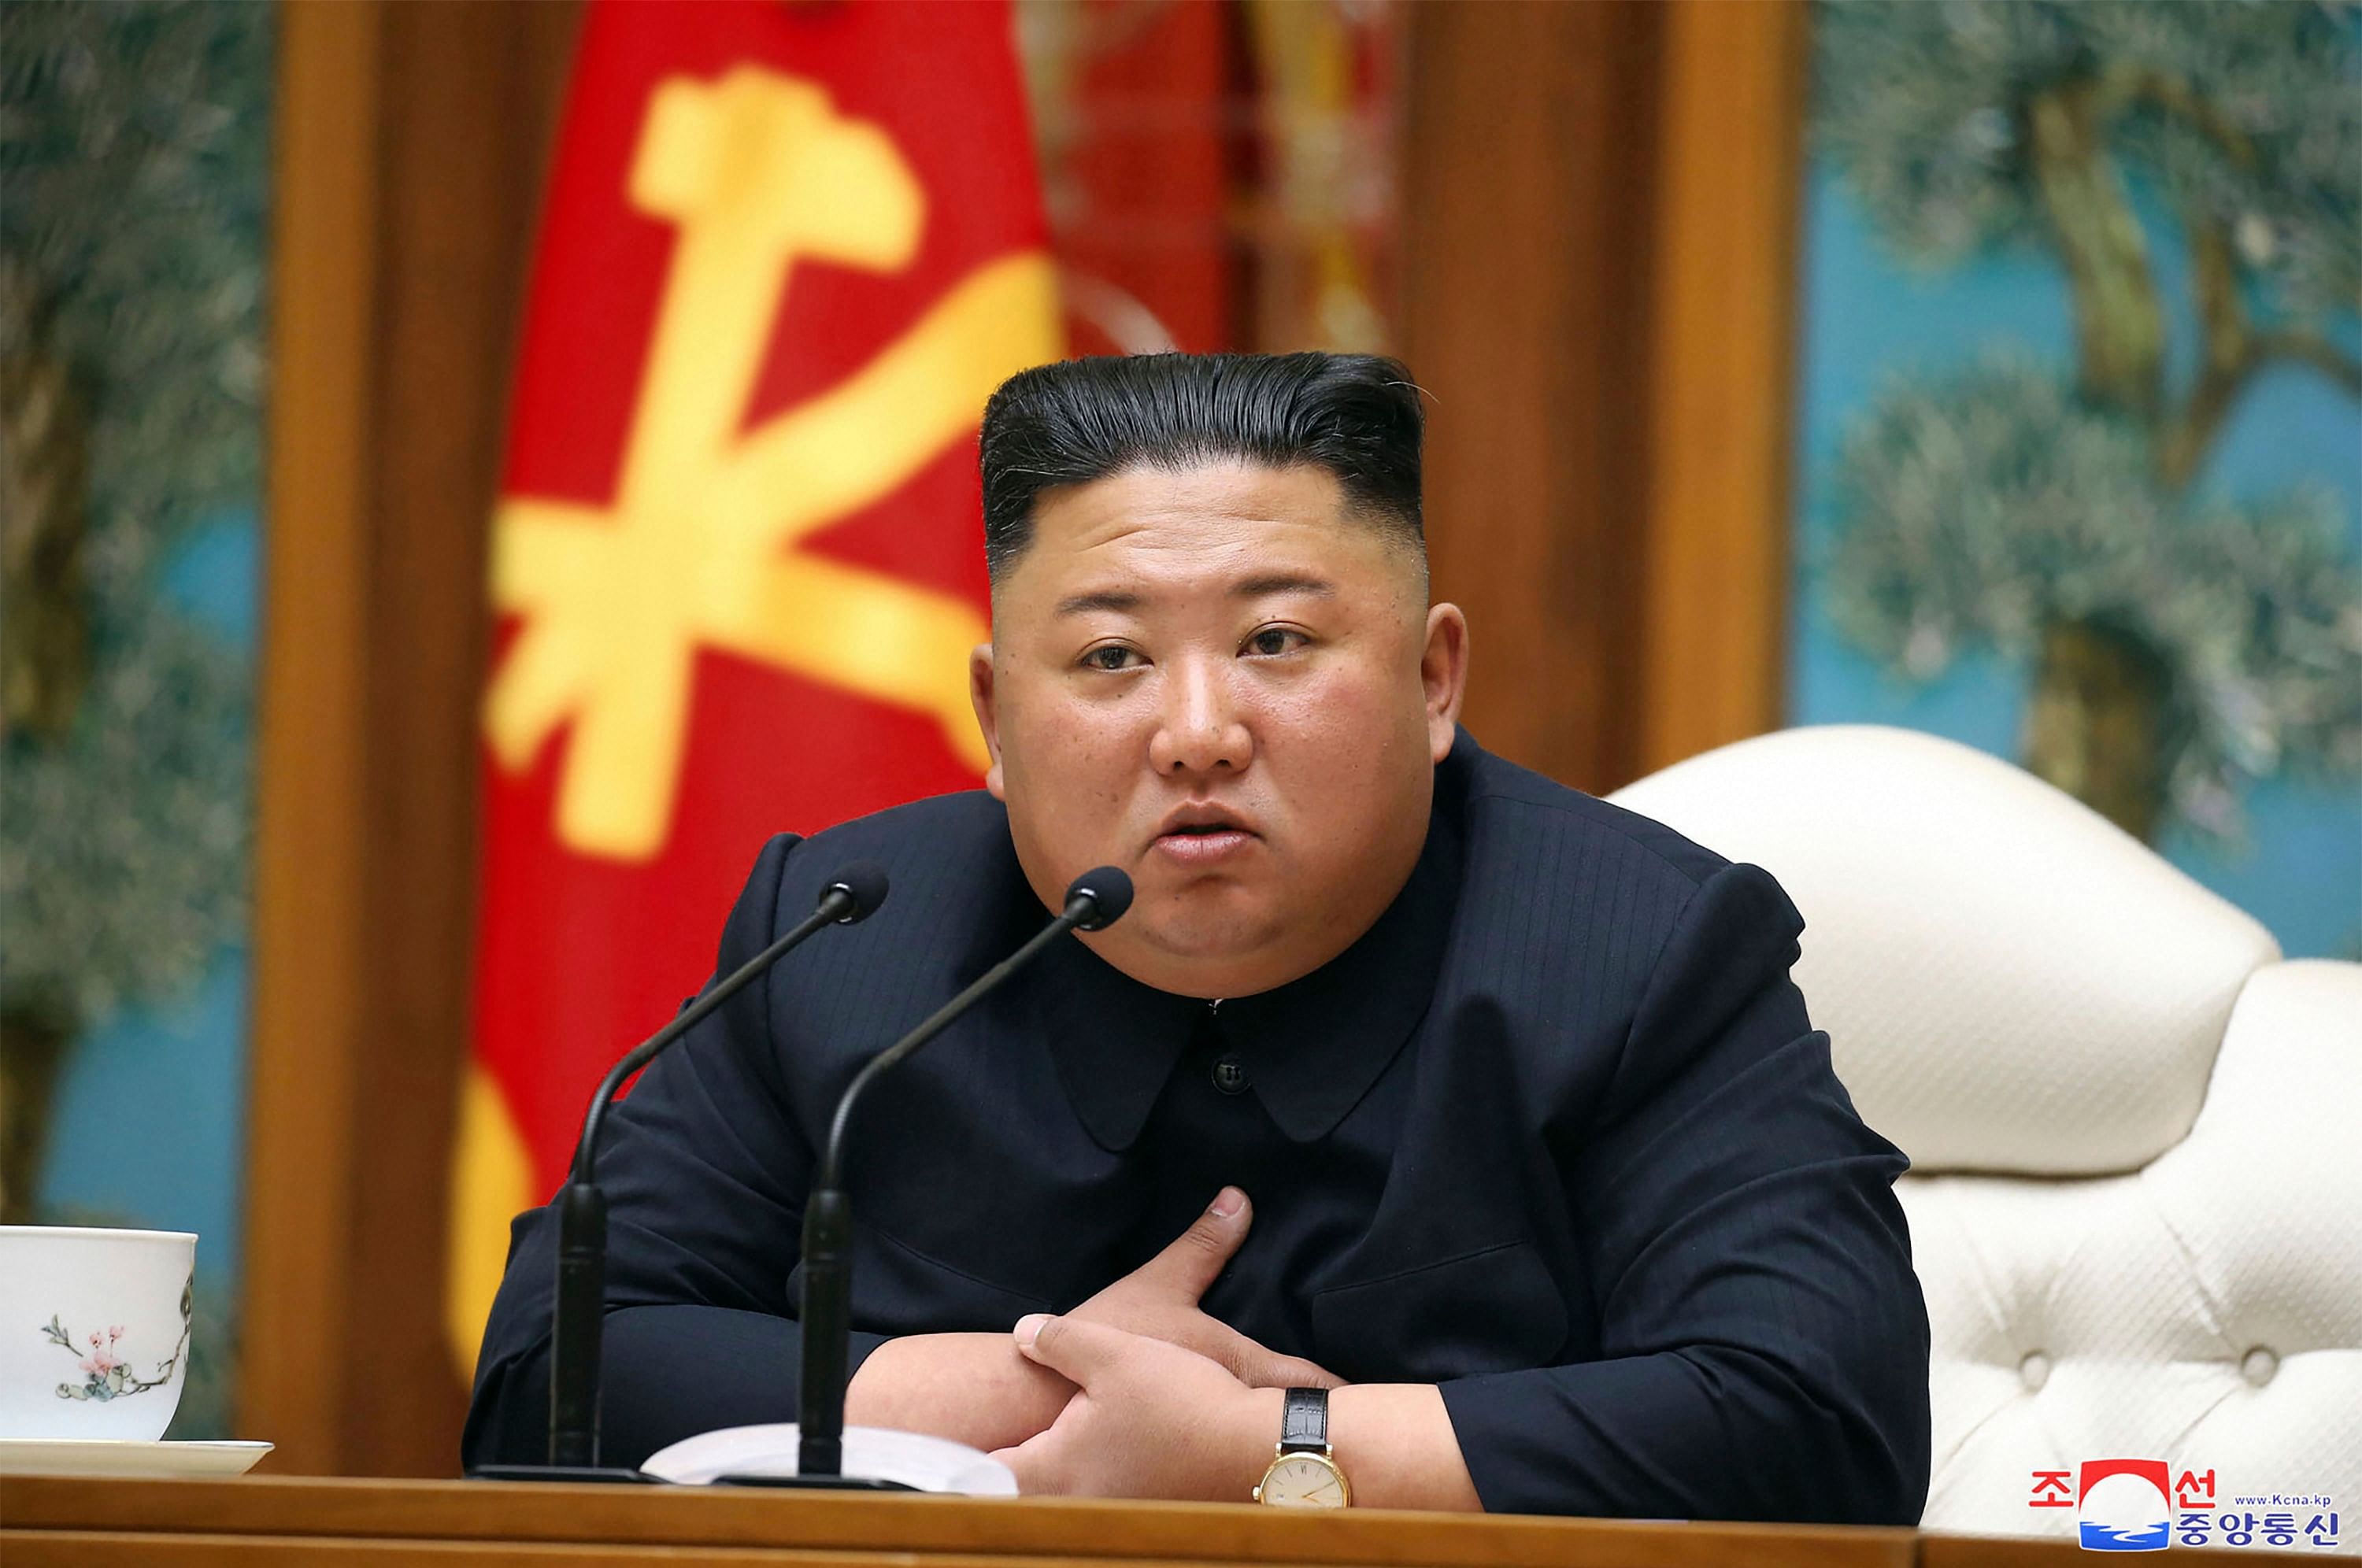 U.S. President Donald Trump said on Monday he has a good idea of how Kim Jong Un is doing and hopes he is fine, but would not elaborate. (Credit: AP Photo)